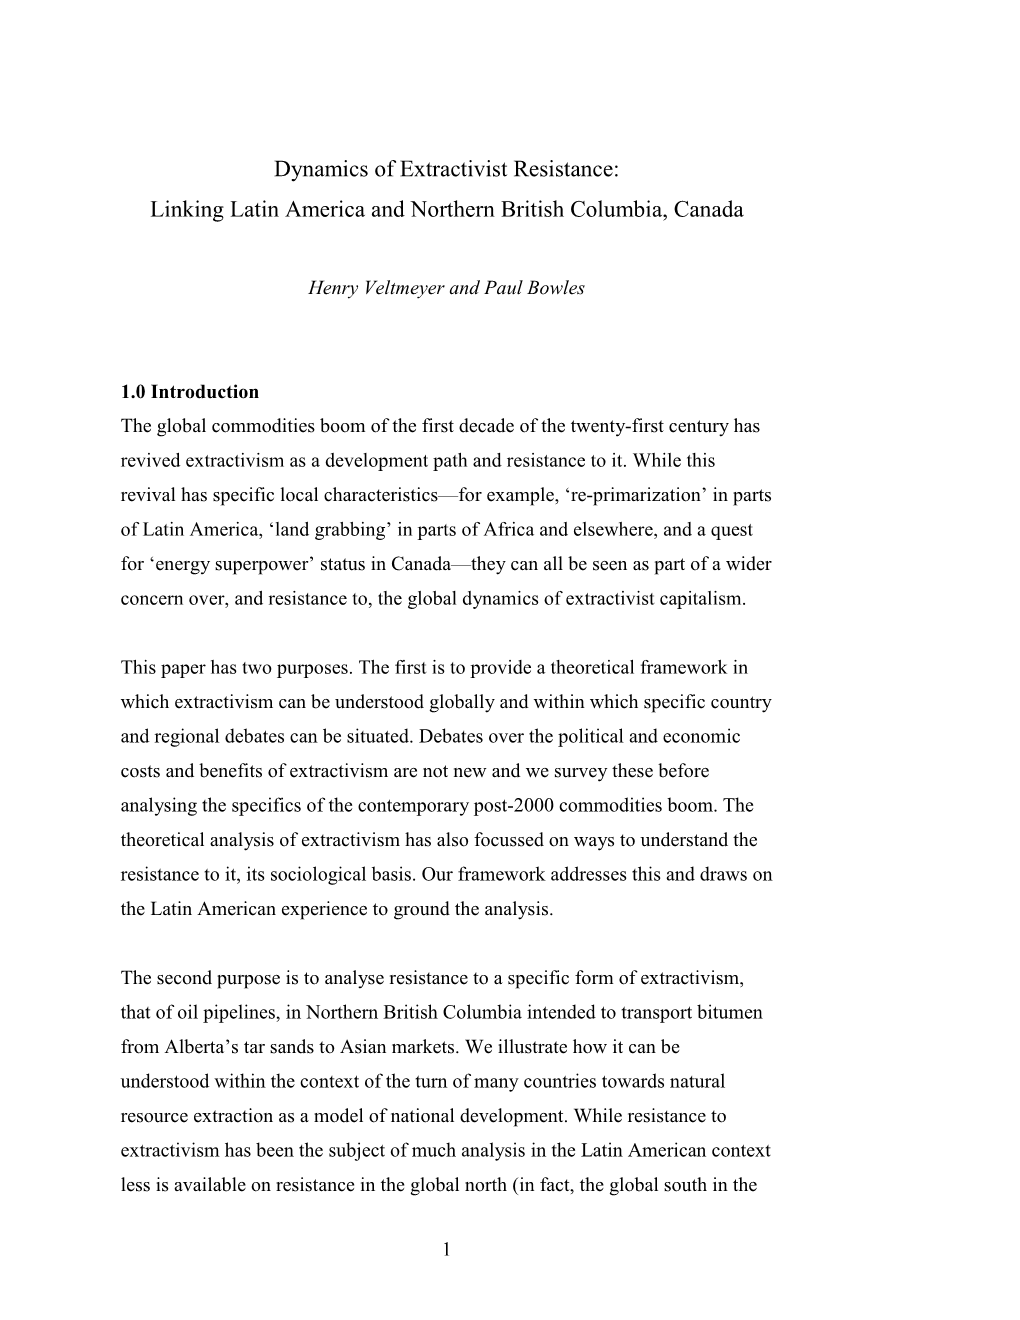 Dynamics of Extractivist Resistance: Linking Latin America and Northern British Columbia, Canada